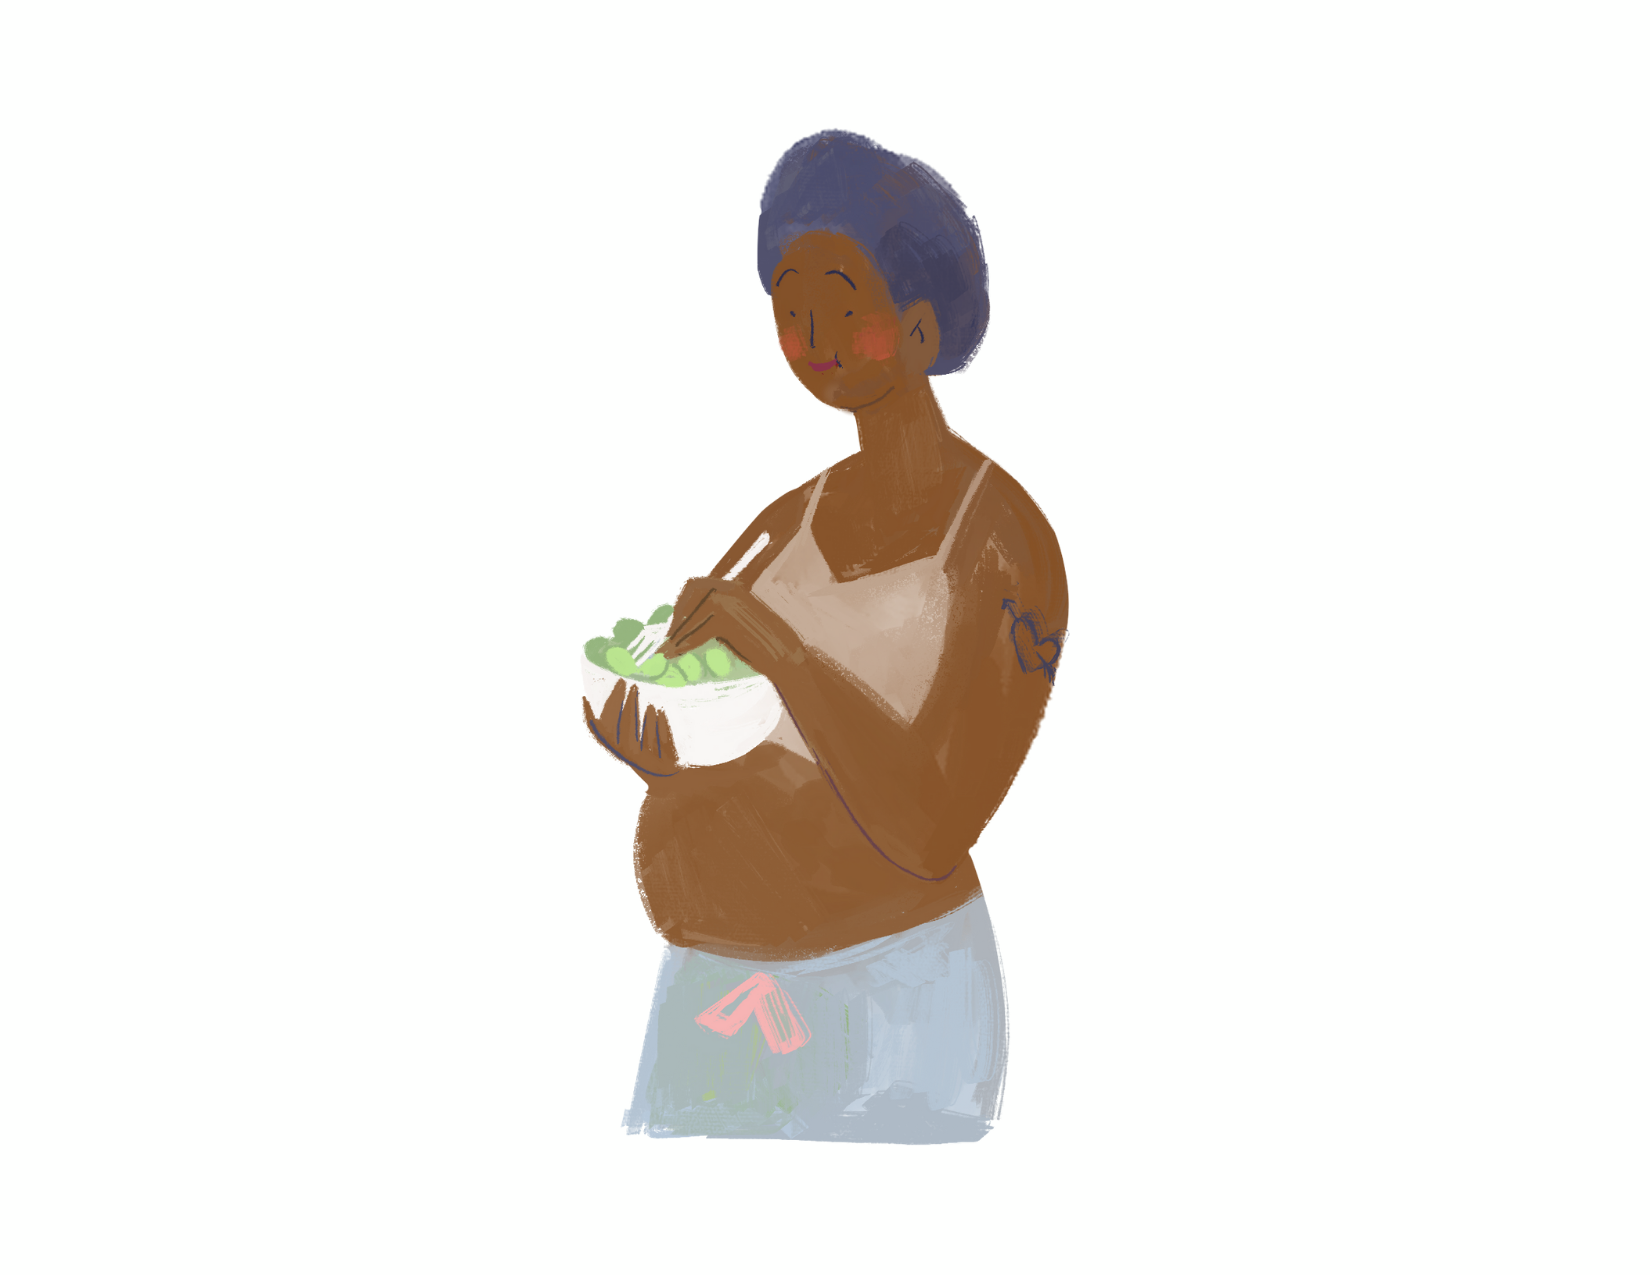 illustrated image of a pregnant person with a bowl of salad resting on their belly